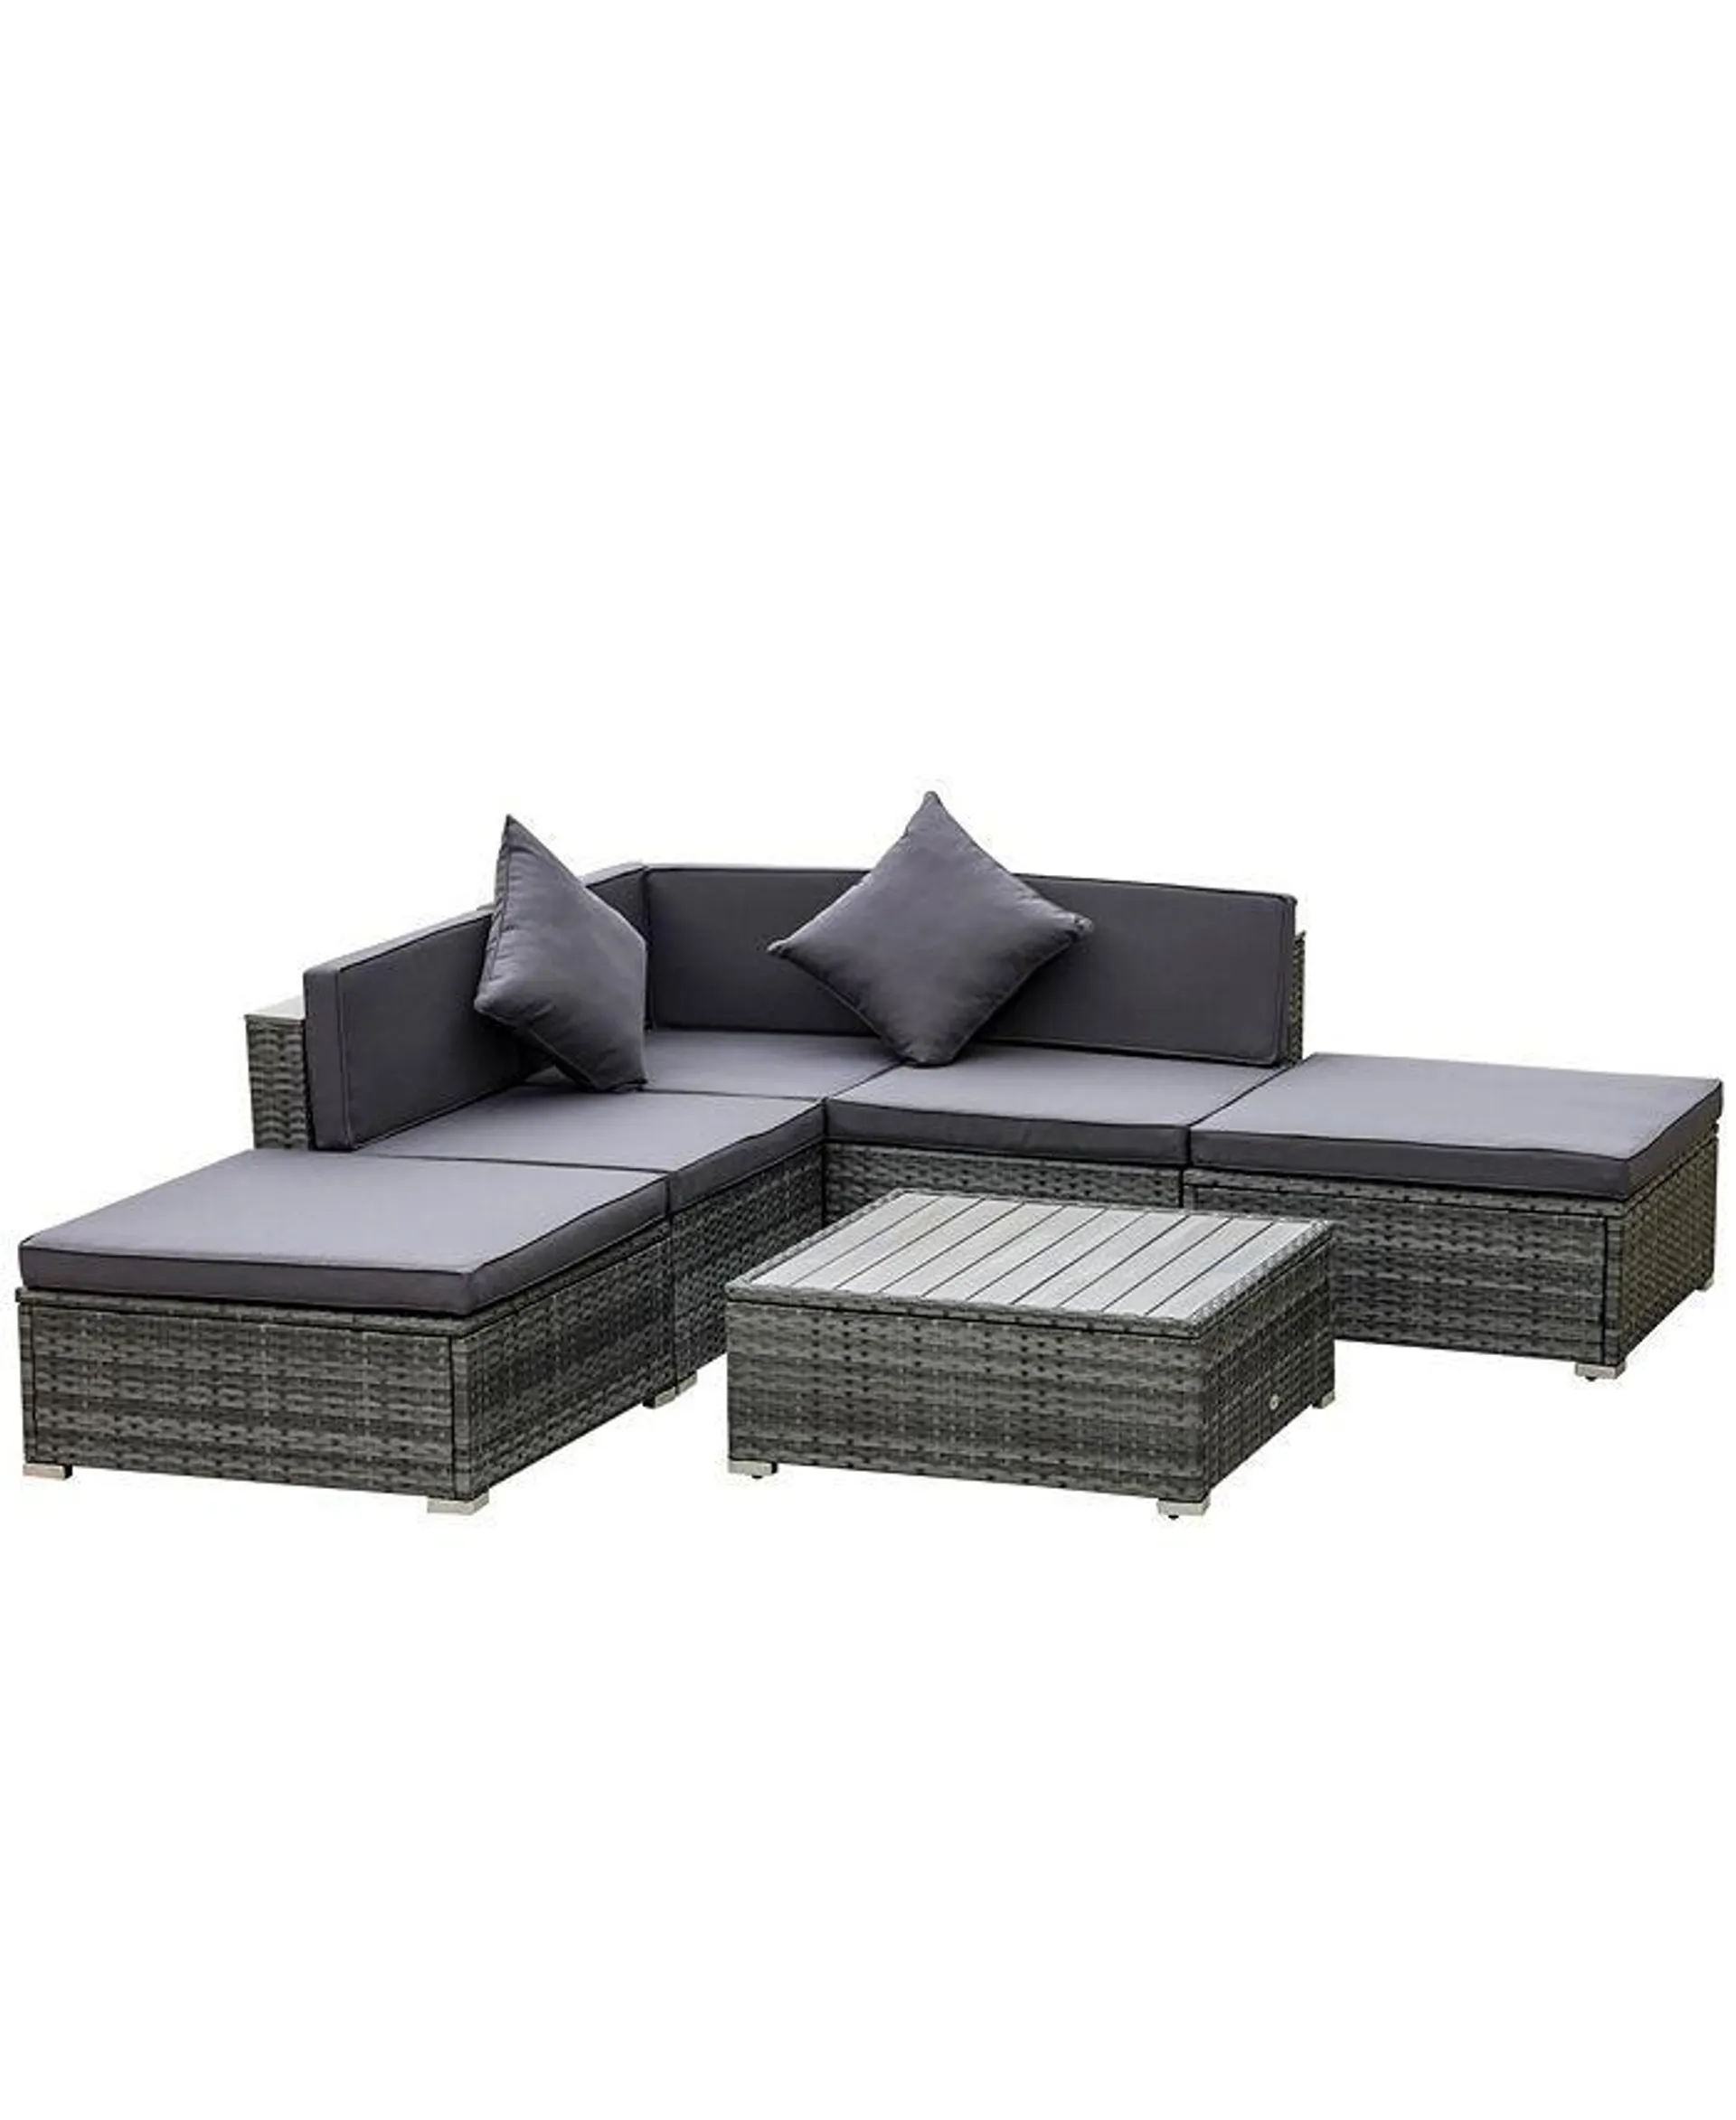 6-Piece Patio Furniture Sets Outdoor Sectional Sofa Set PE Rattan Conversation Sets with Corner Sofa, Middle Sofa, and Acacia Wood Top Coffee Table, Grey